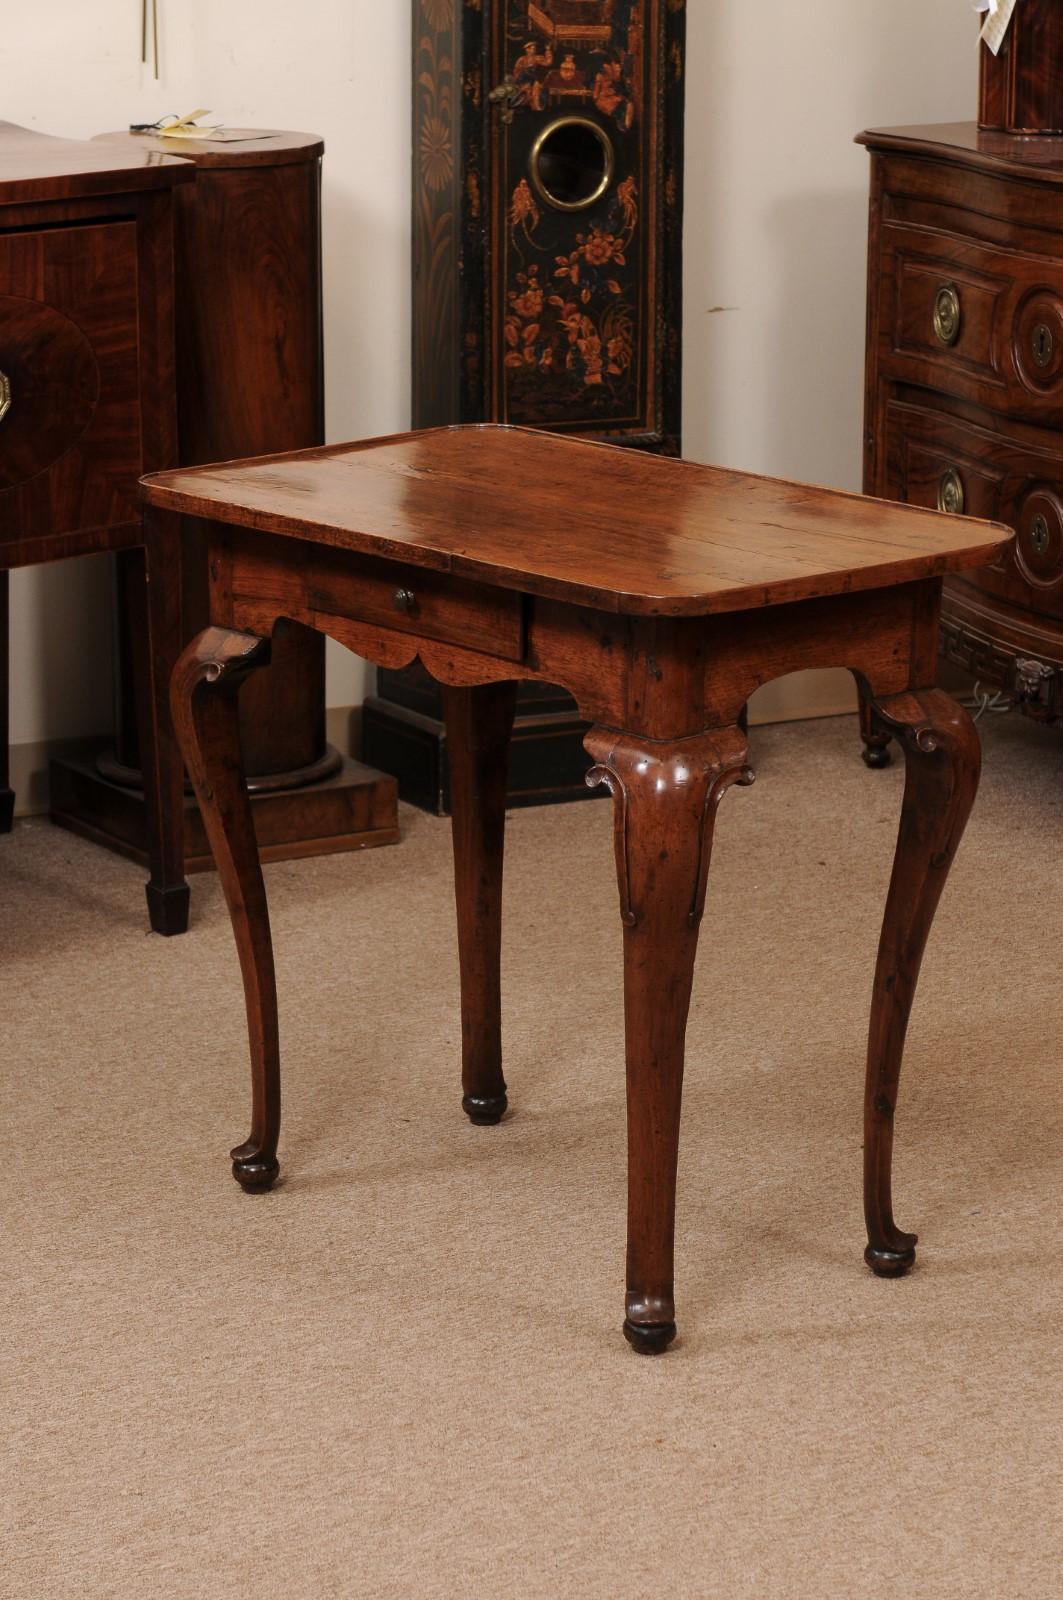 Early 18th Century Italian Walnut Side Table with Tray Top, Drawer, Cabriole Leg For Sale 7